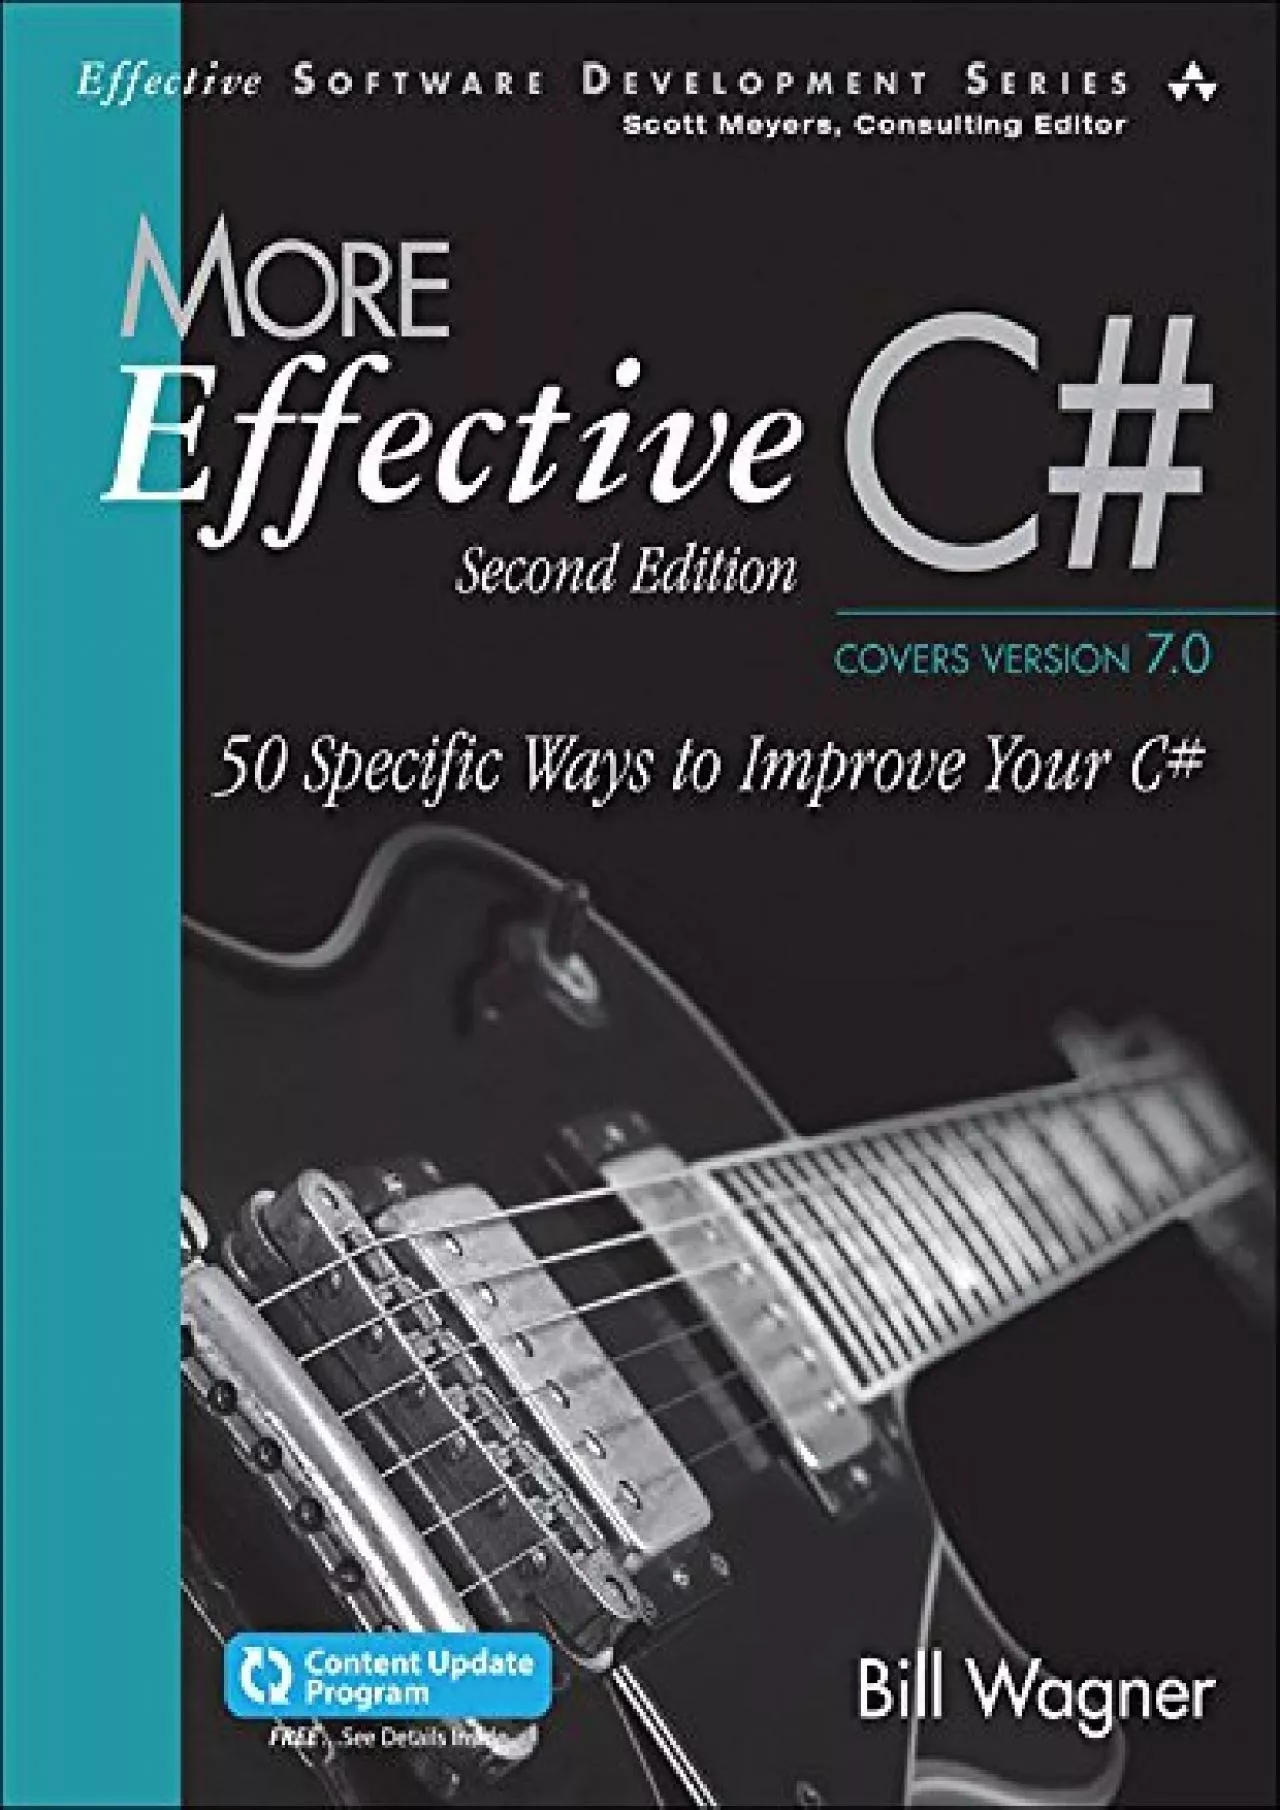 [READING BOOK]-More Effective C: 50 Specific Ways to Improve Your C (Effective Software